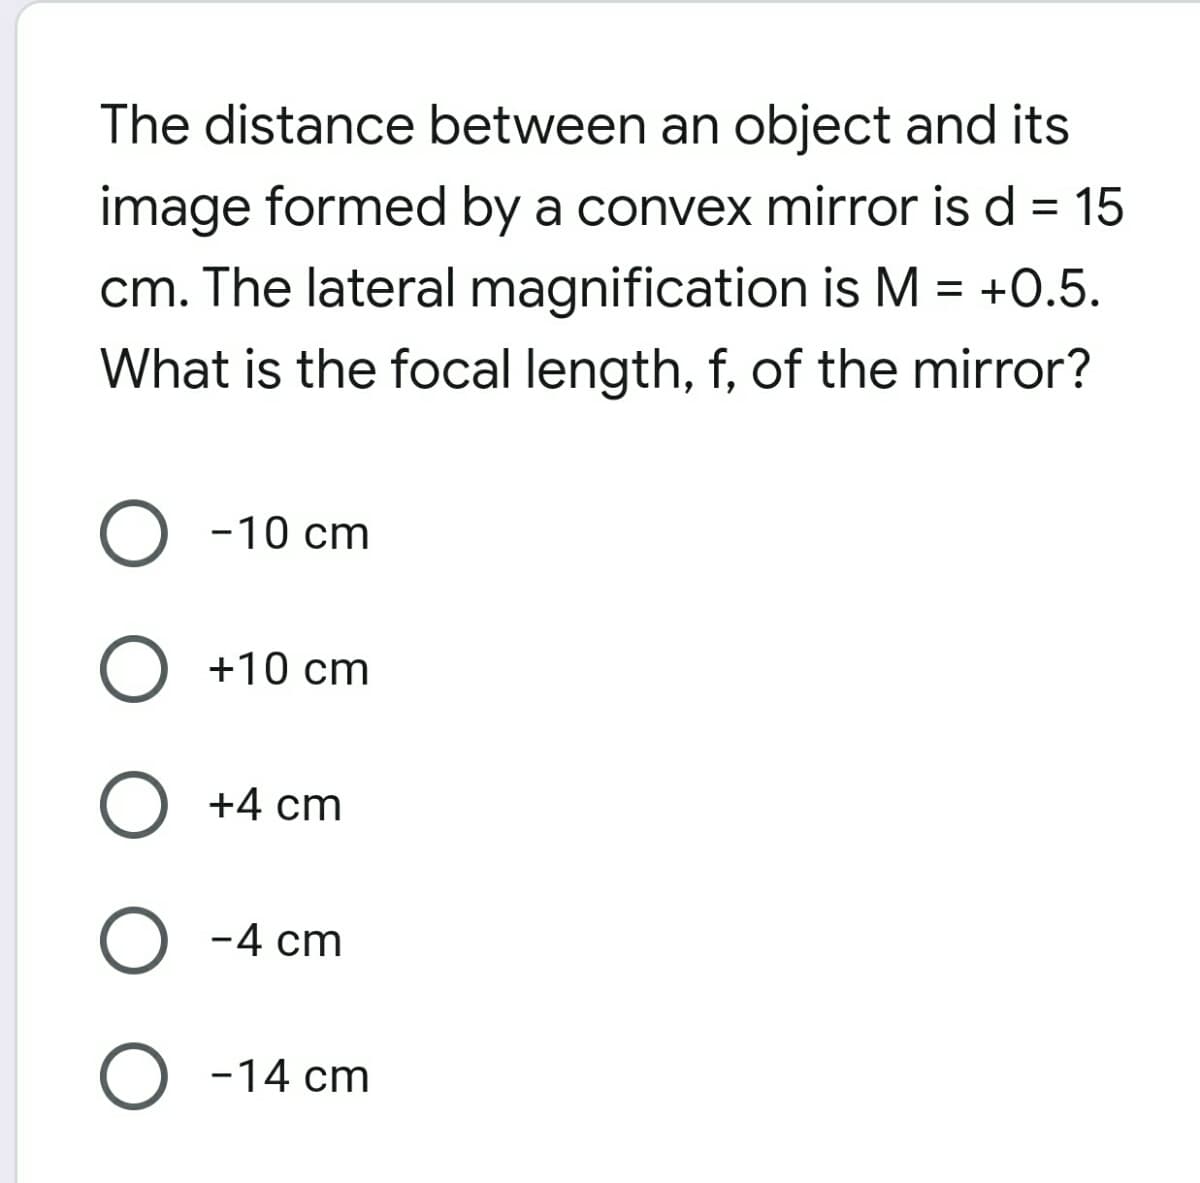 The distance between an object and its
image formed by a convex mirror is d = 15
cm. The lateral magnification is M = +0.5.
What is the focal length, f, of the mirror?
-10 cm
+10 cm
+4 cm
-4 cm
-14 cm
